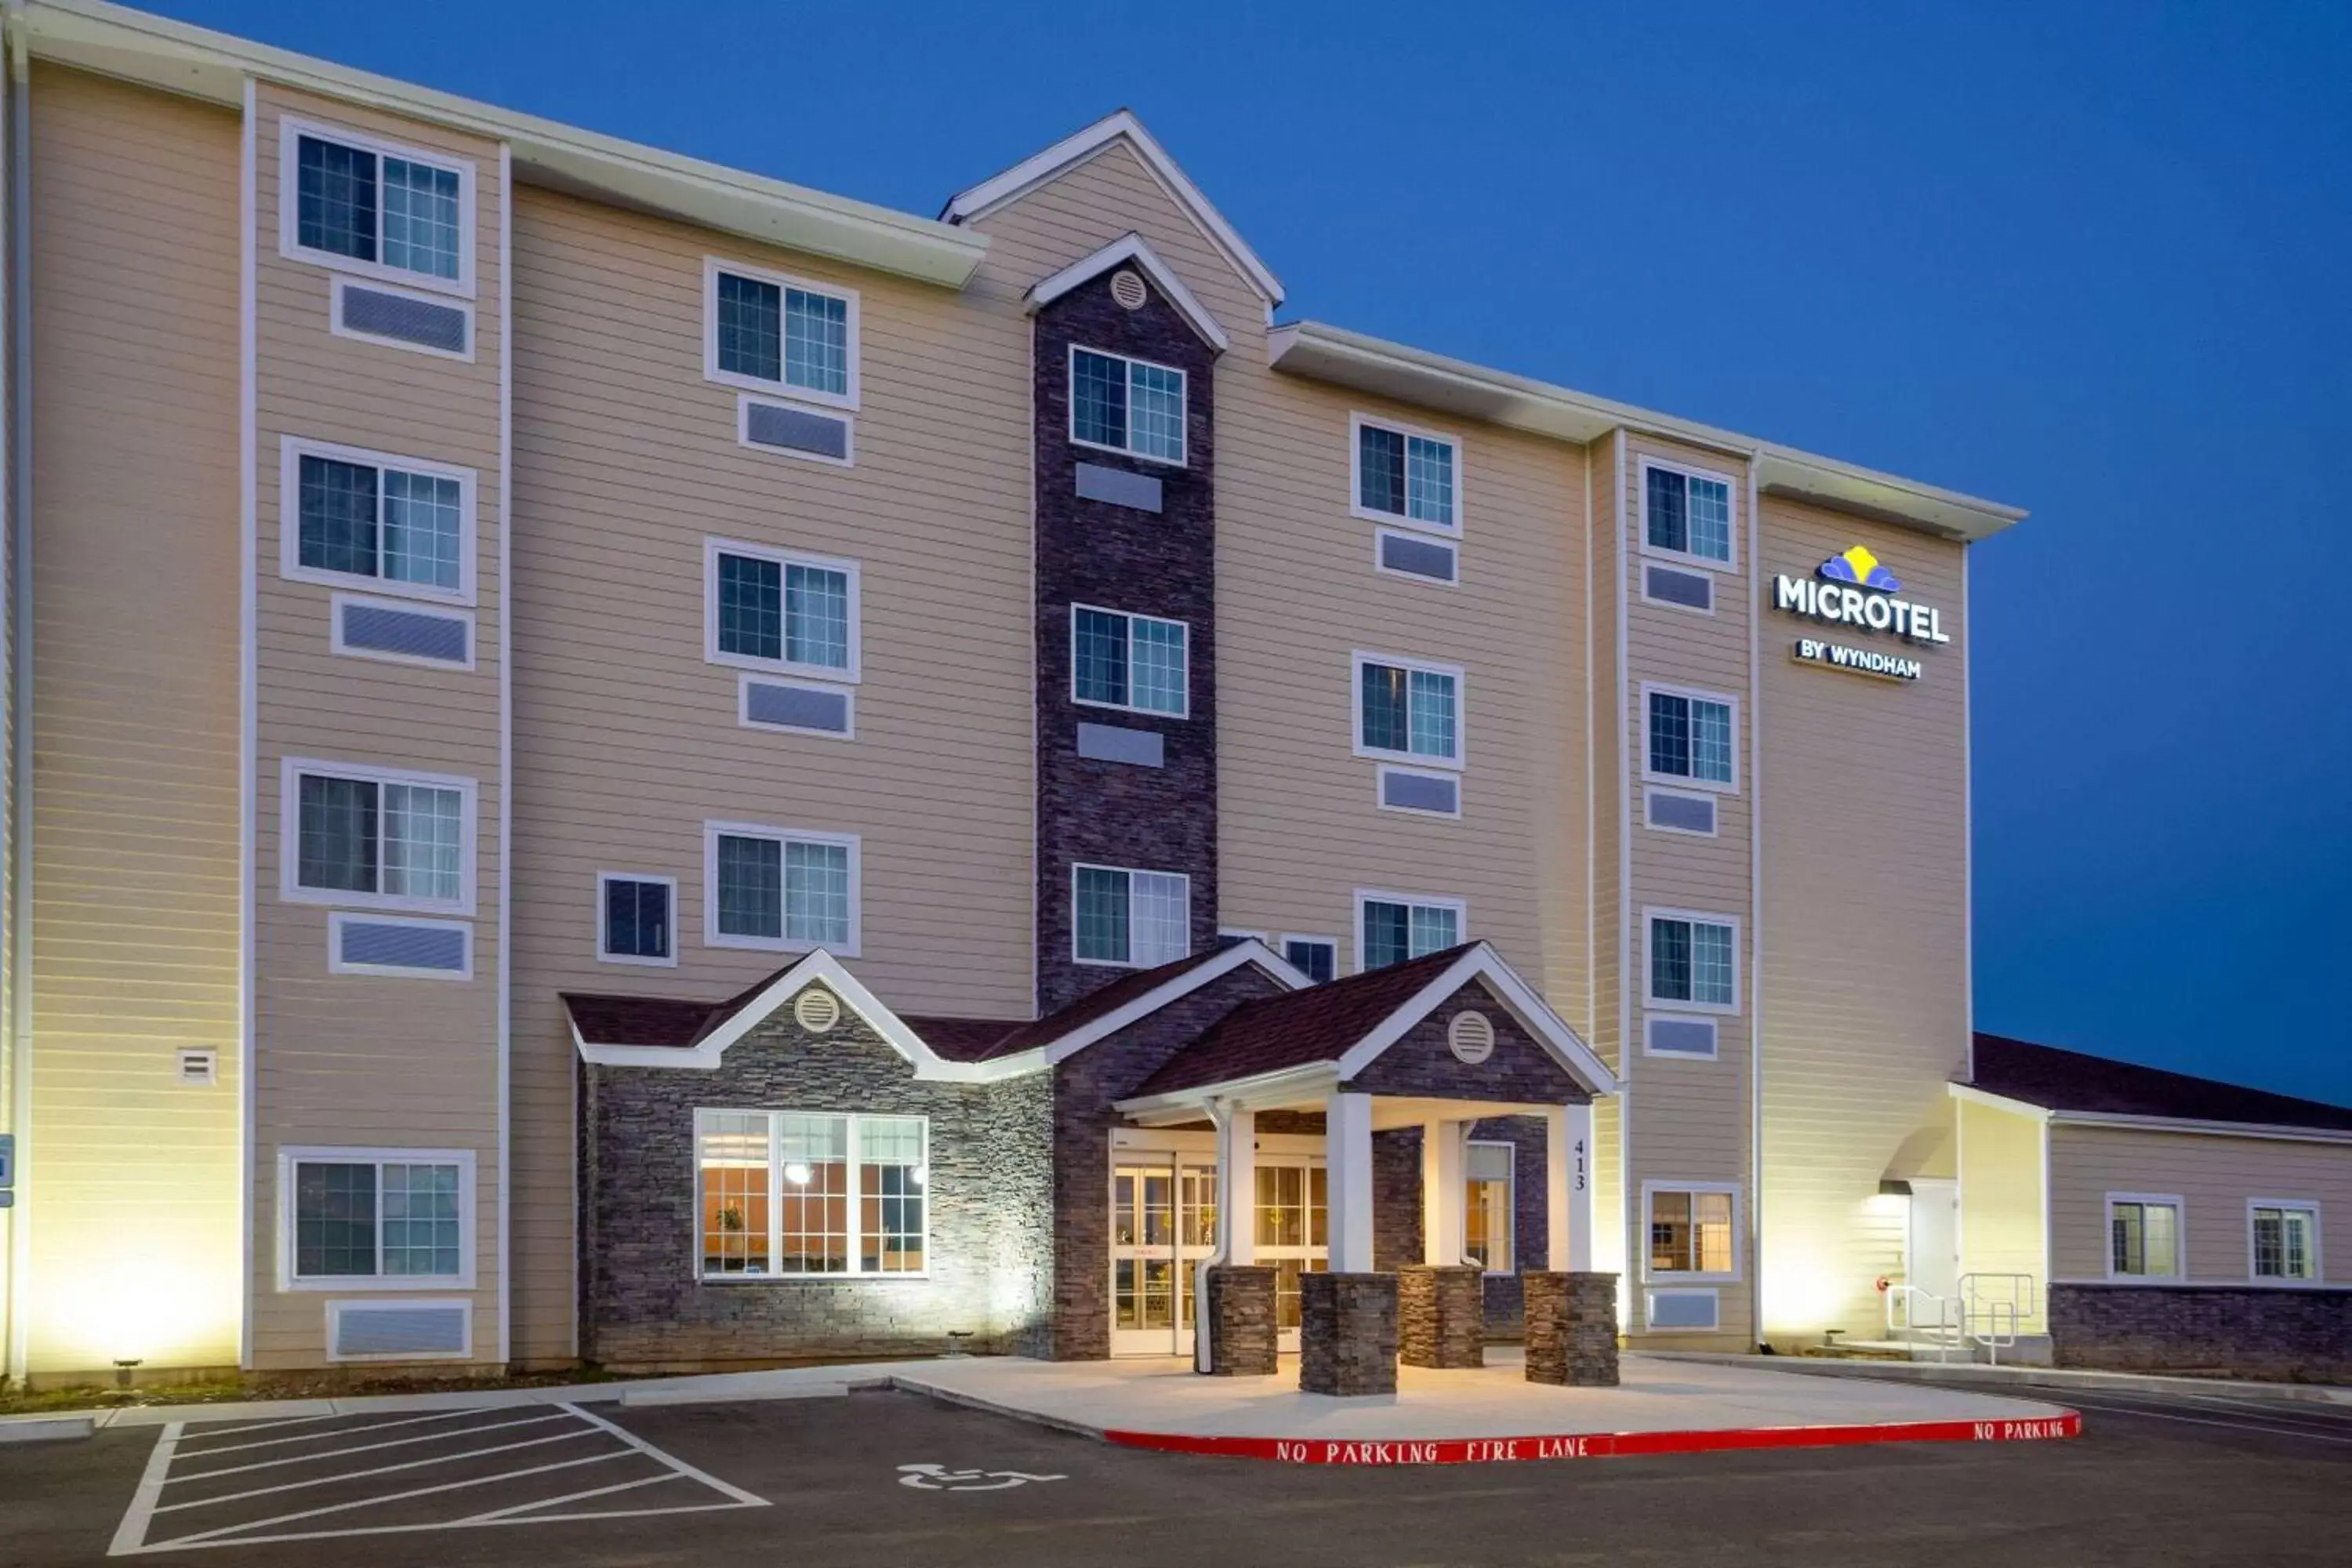 Property Building in Microtel Inn & Suites by Wyndham Liberty NE Kansas City Area